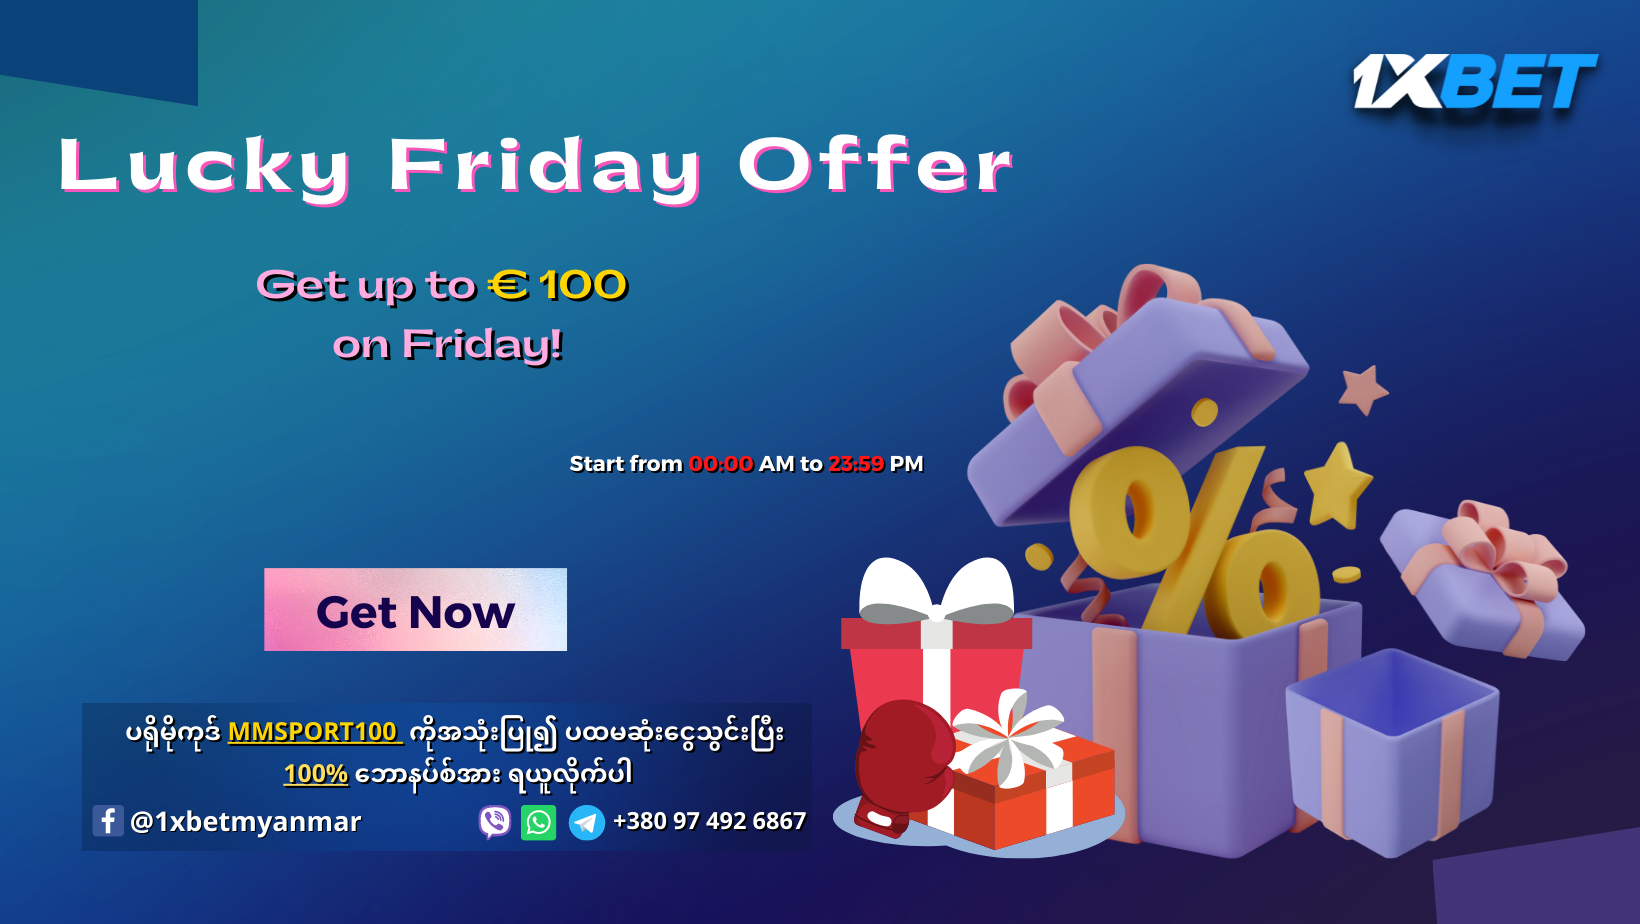 1xbet Lucky Friday Offer